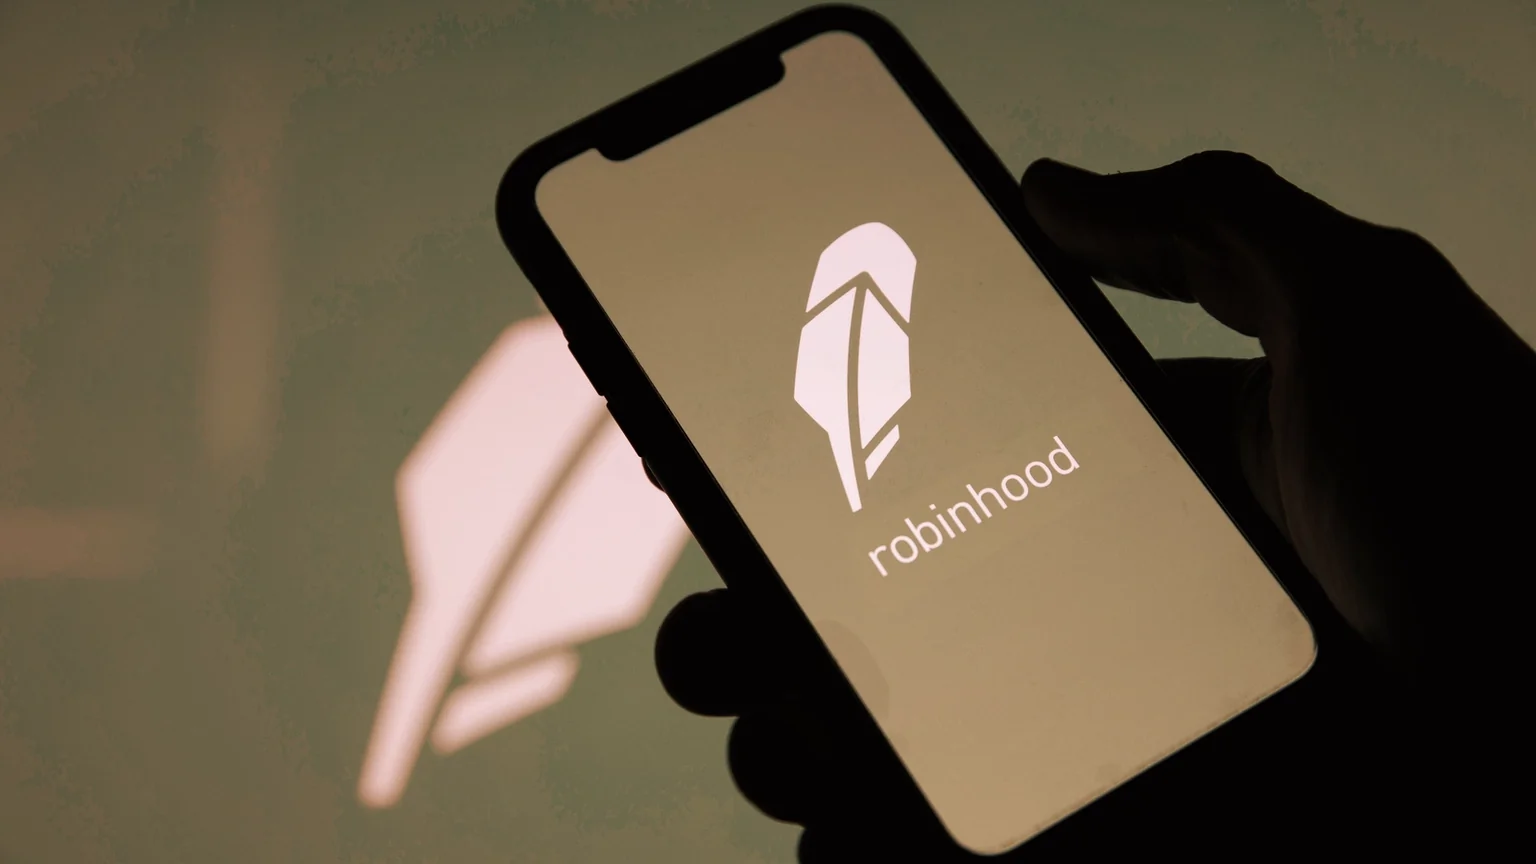 Robinhood is a popular crypto and stock trading app. Image: Shutterstock